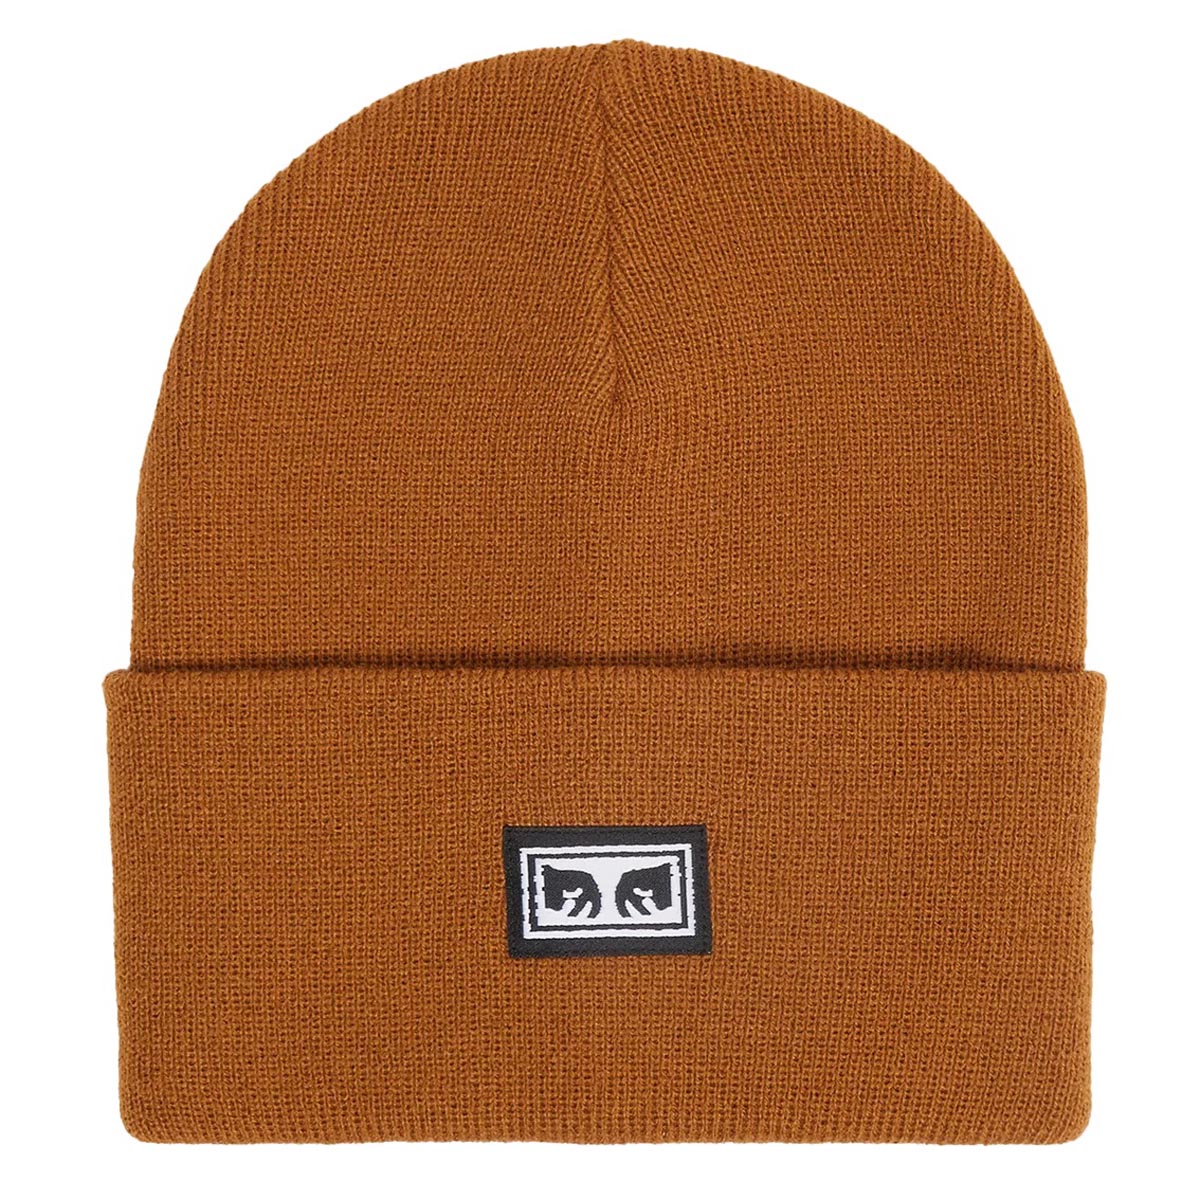 Obey Icon Eyes Beanie - Rubber image 1